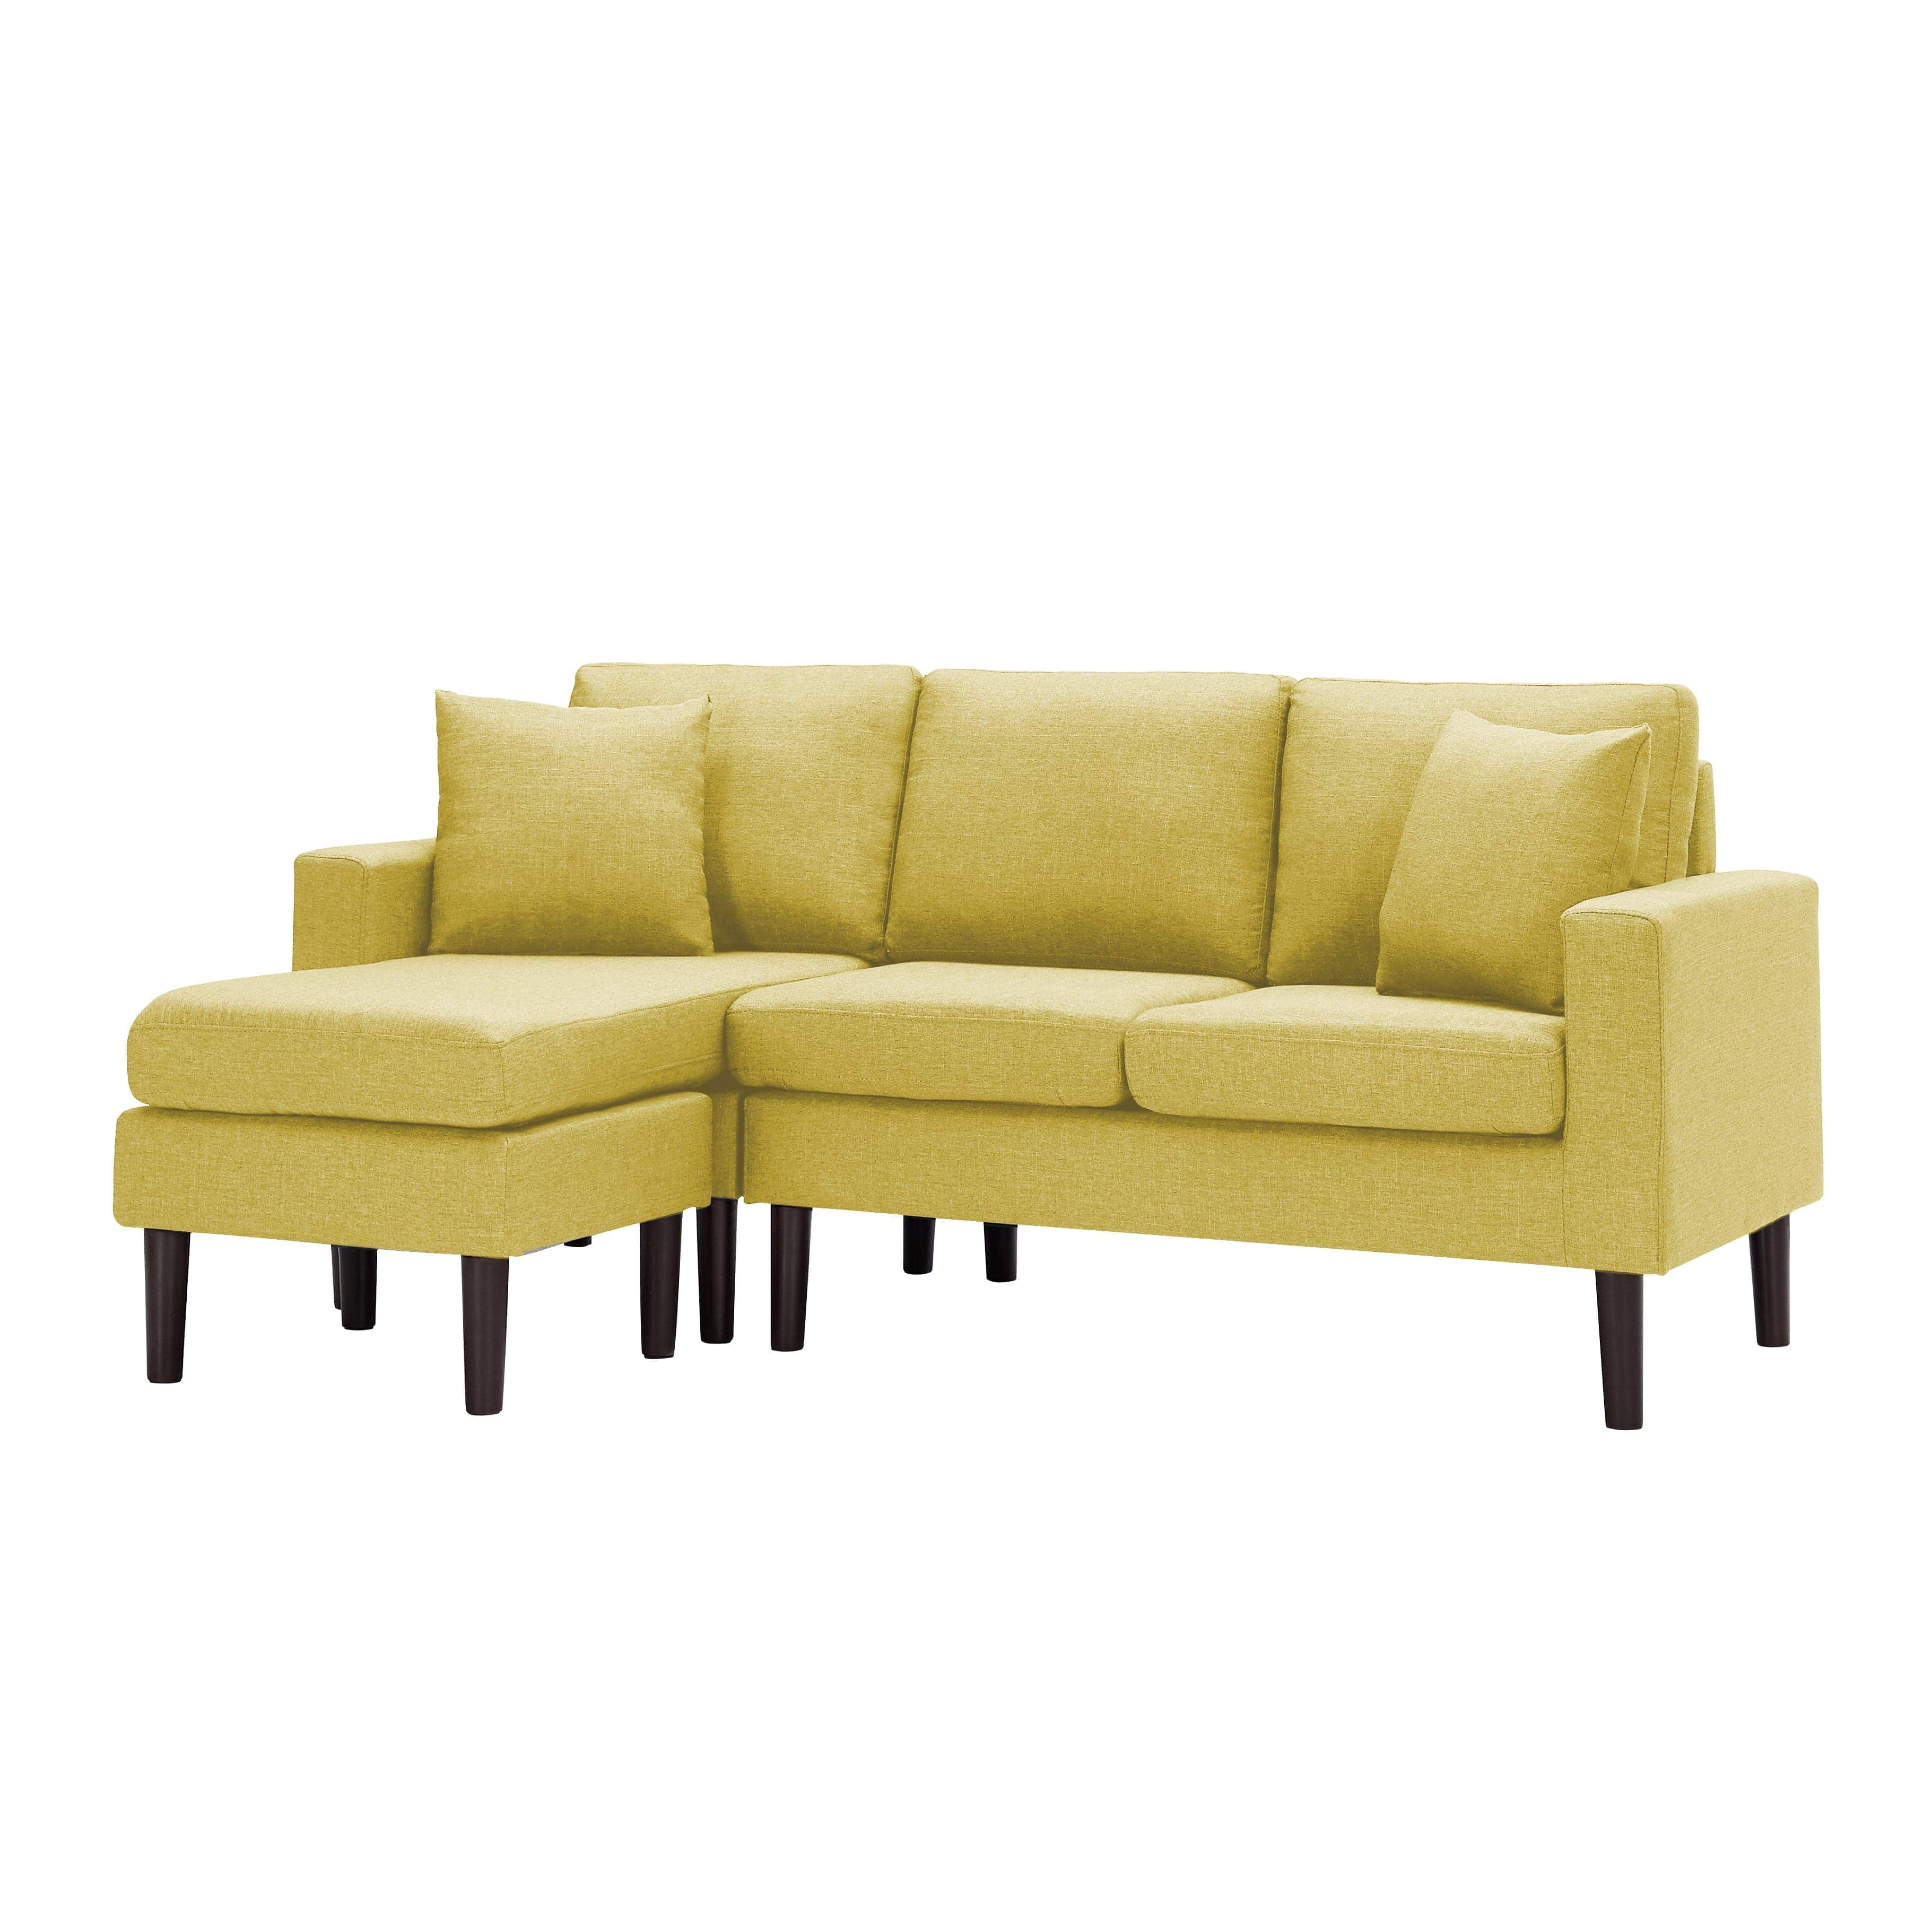 - TFC&H Co. 72" SECTIONAL SOFA LEFT HAND FACING w/ 2 PILLOWS- Ships from The US - sectional at TFC&H Co.